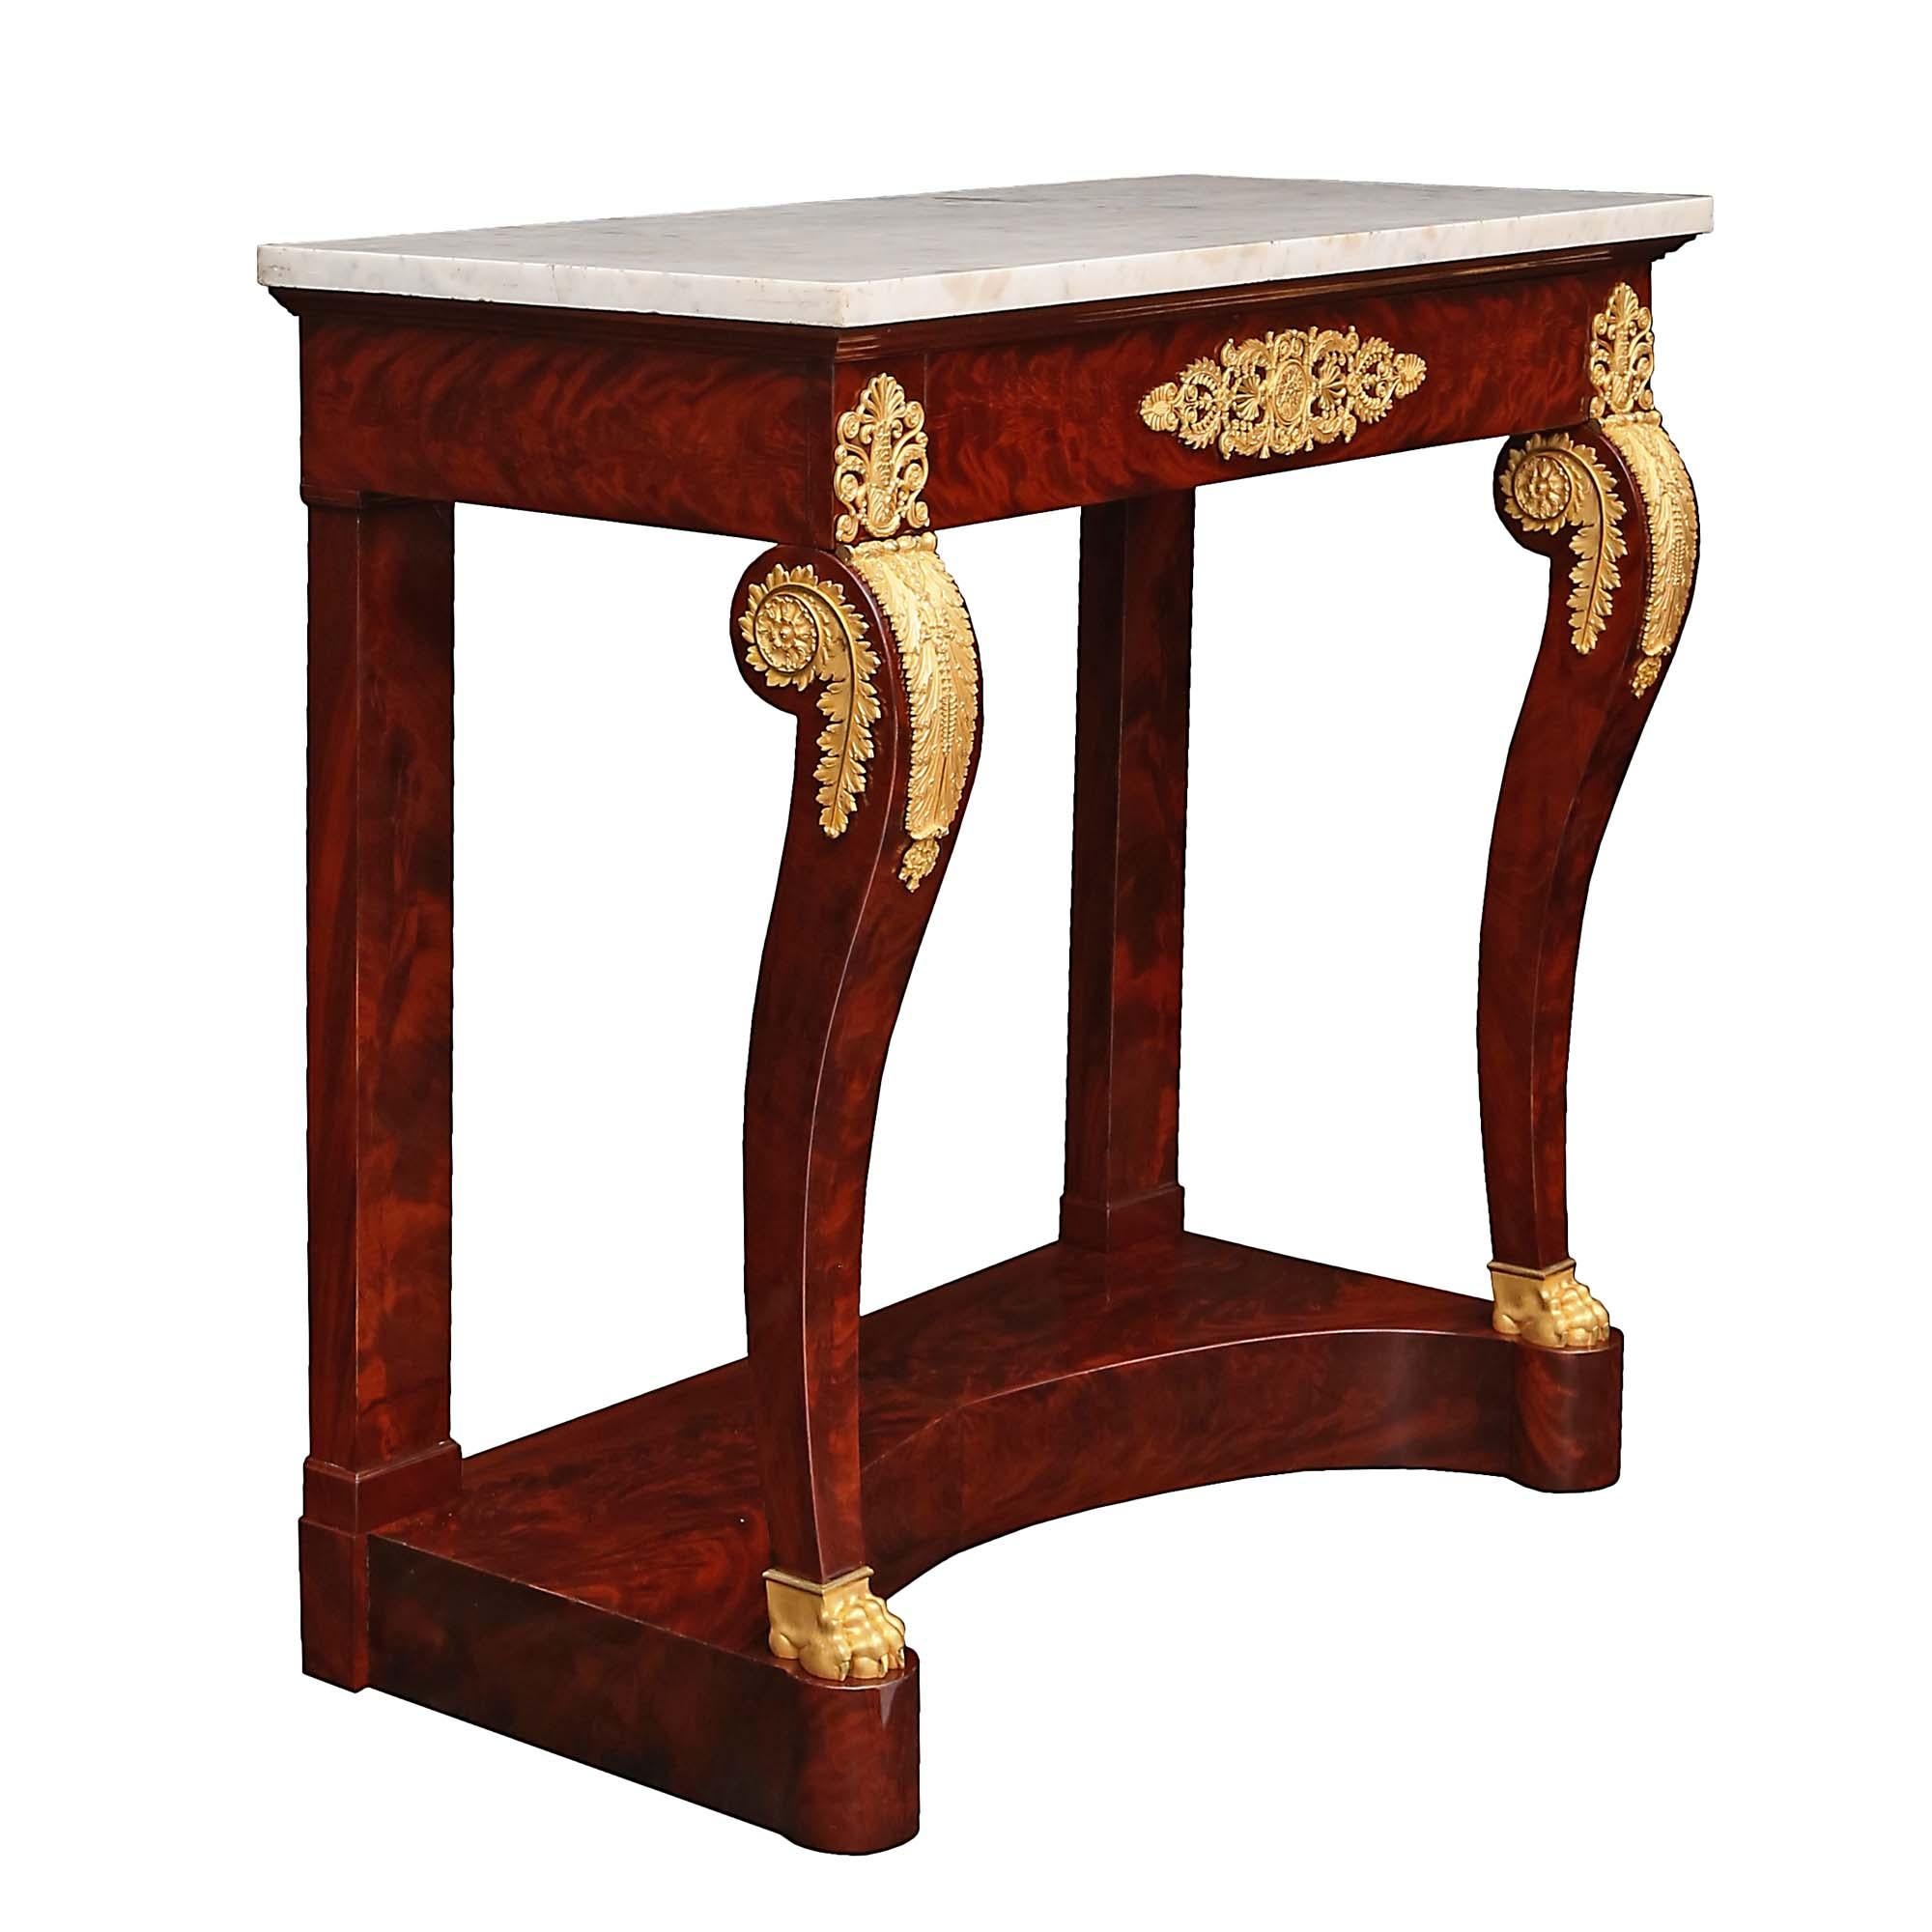 French Early 19th Century First Empire Period Mahogany and Ormolu Console In Good Condition For Sale In West Palm Beach, FL